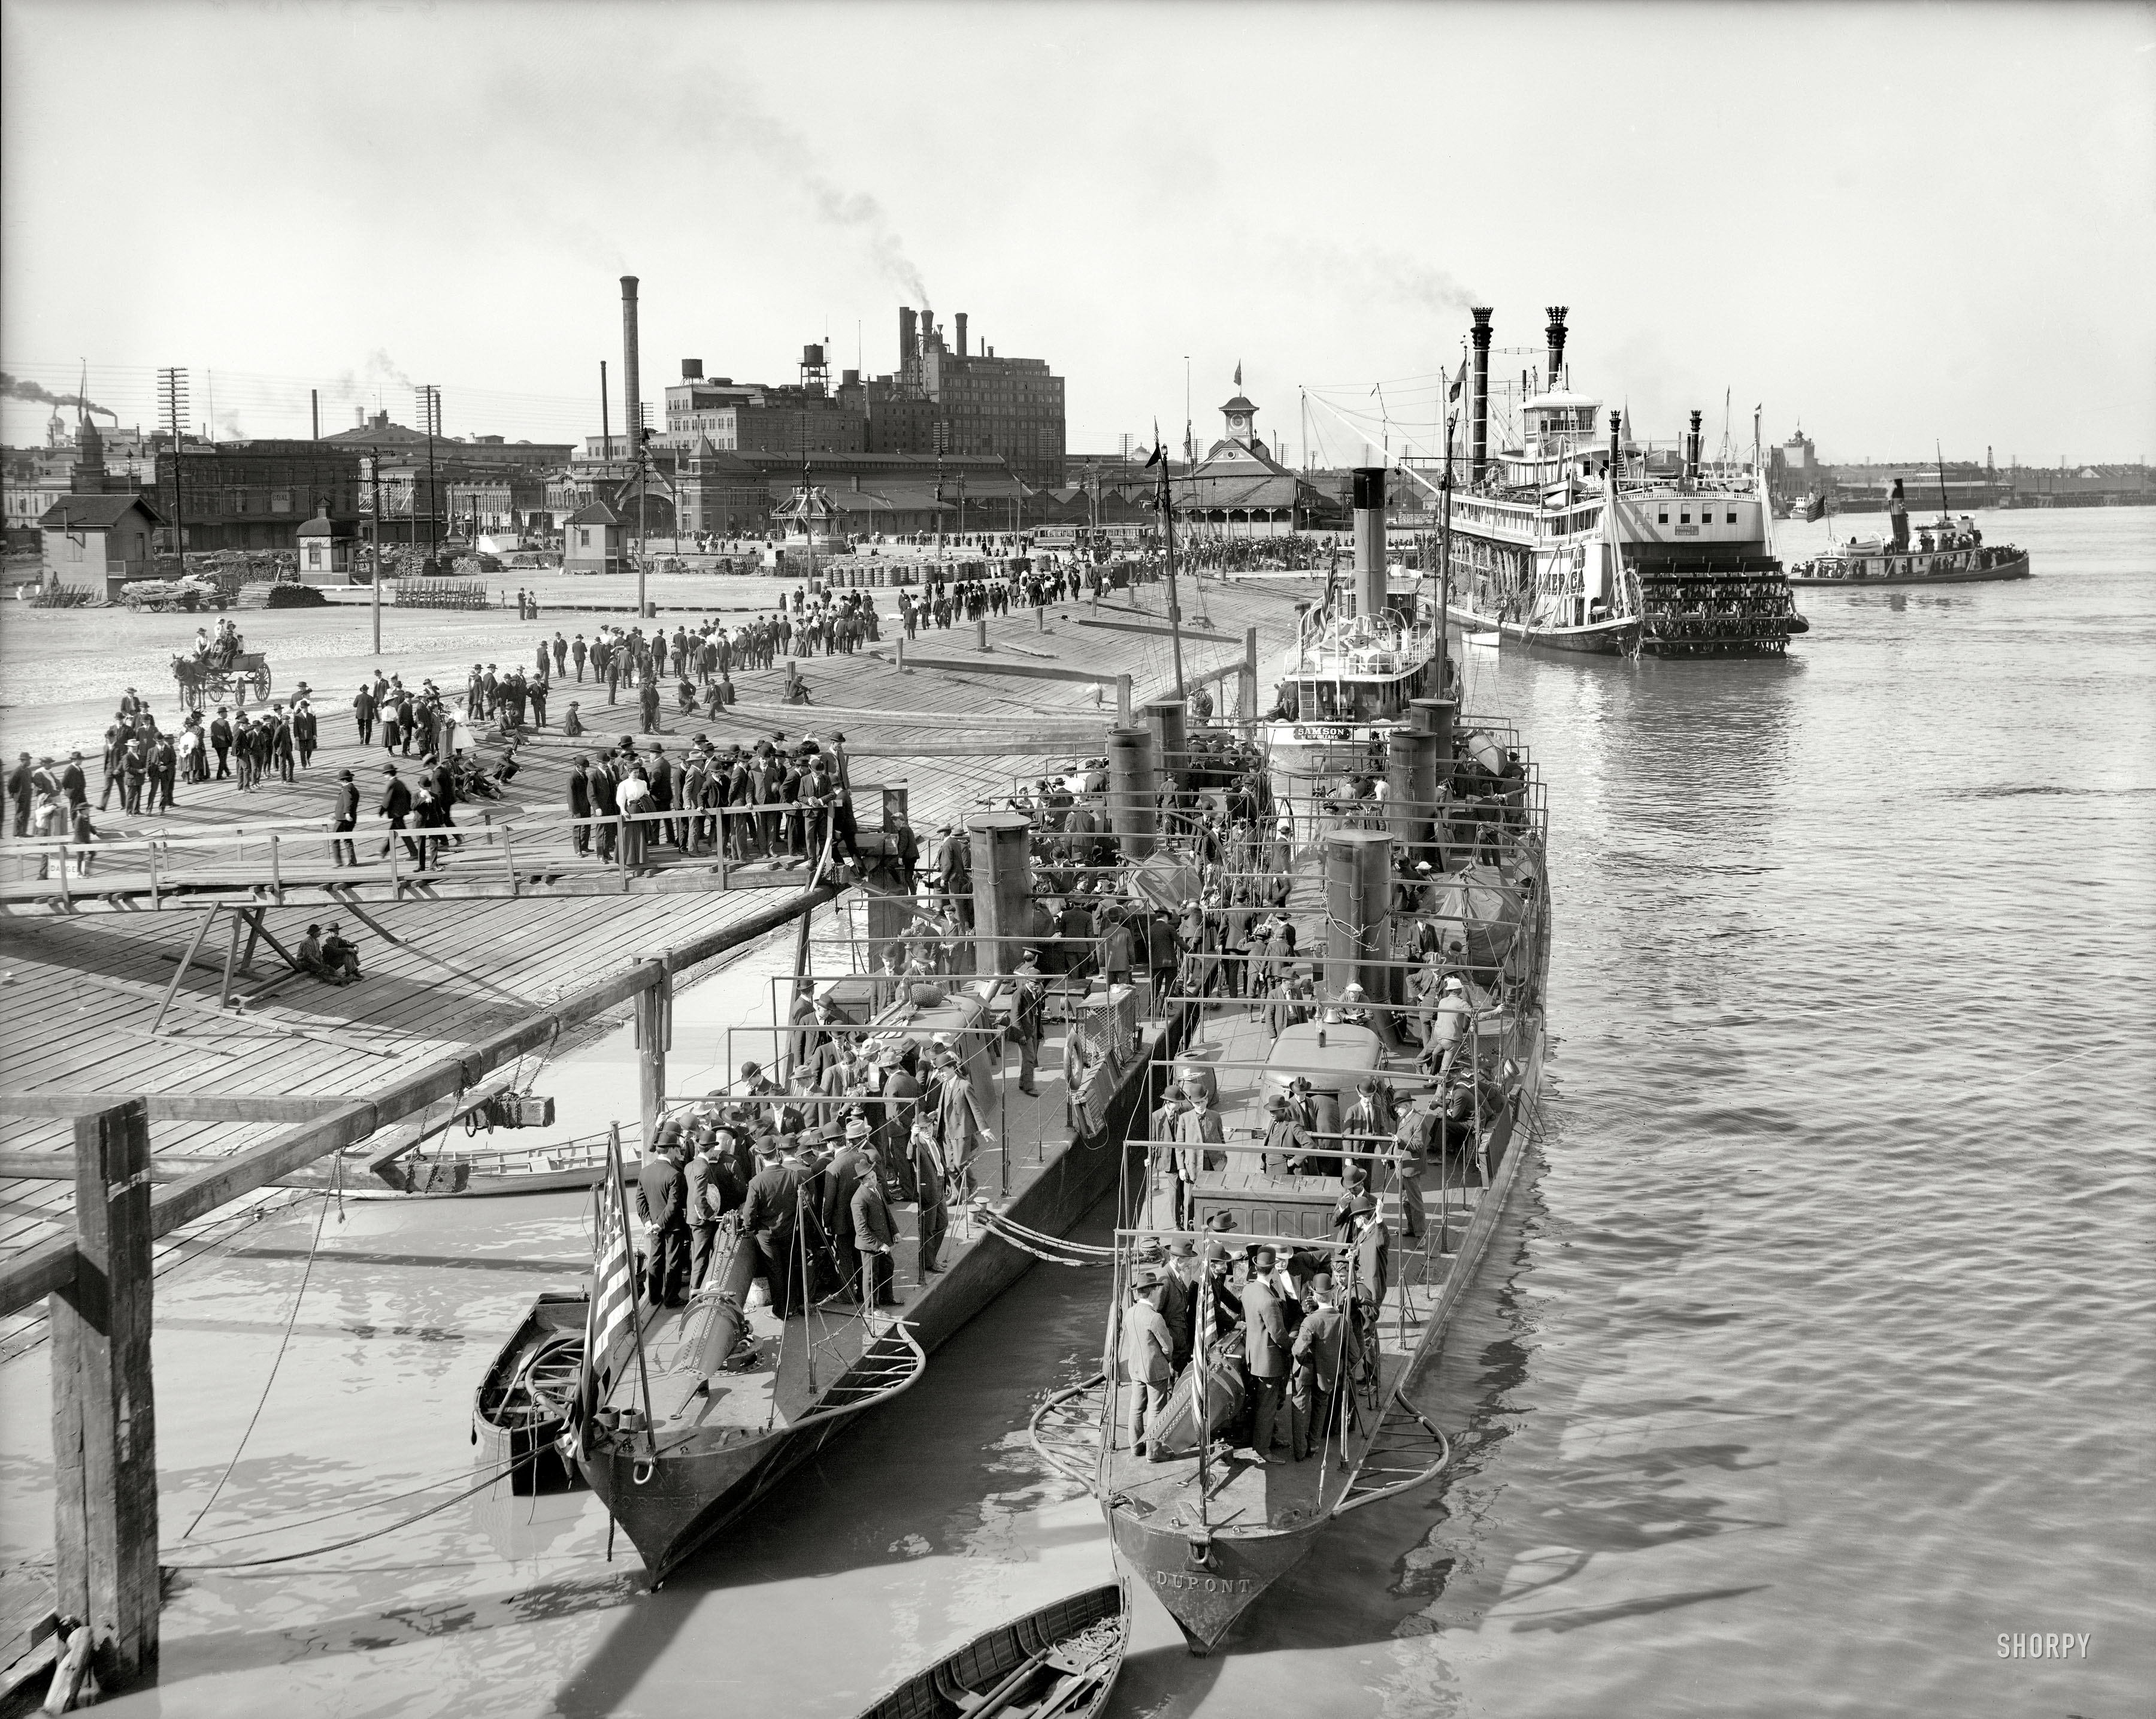 New Orleans circa 1906. "Visiting the torpedo boats." The Porter and the Dupont. 8x10 inch dry plate glass negative, Detroit Publishing Company. View full size.